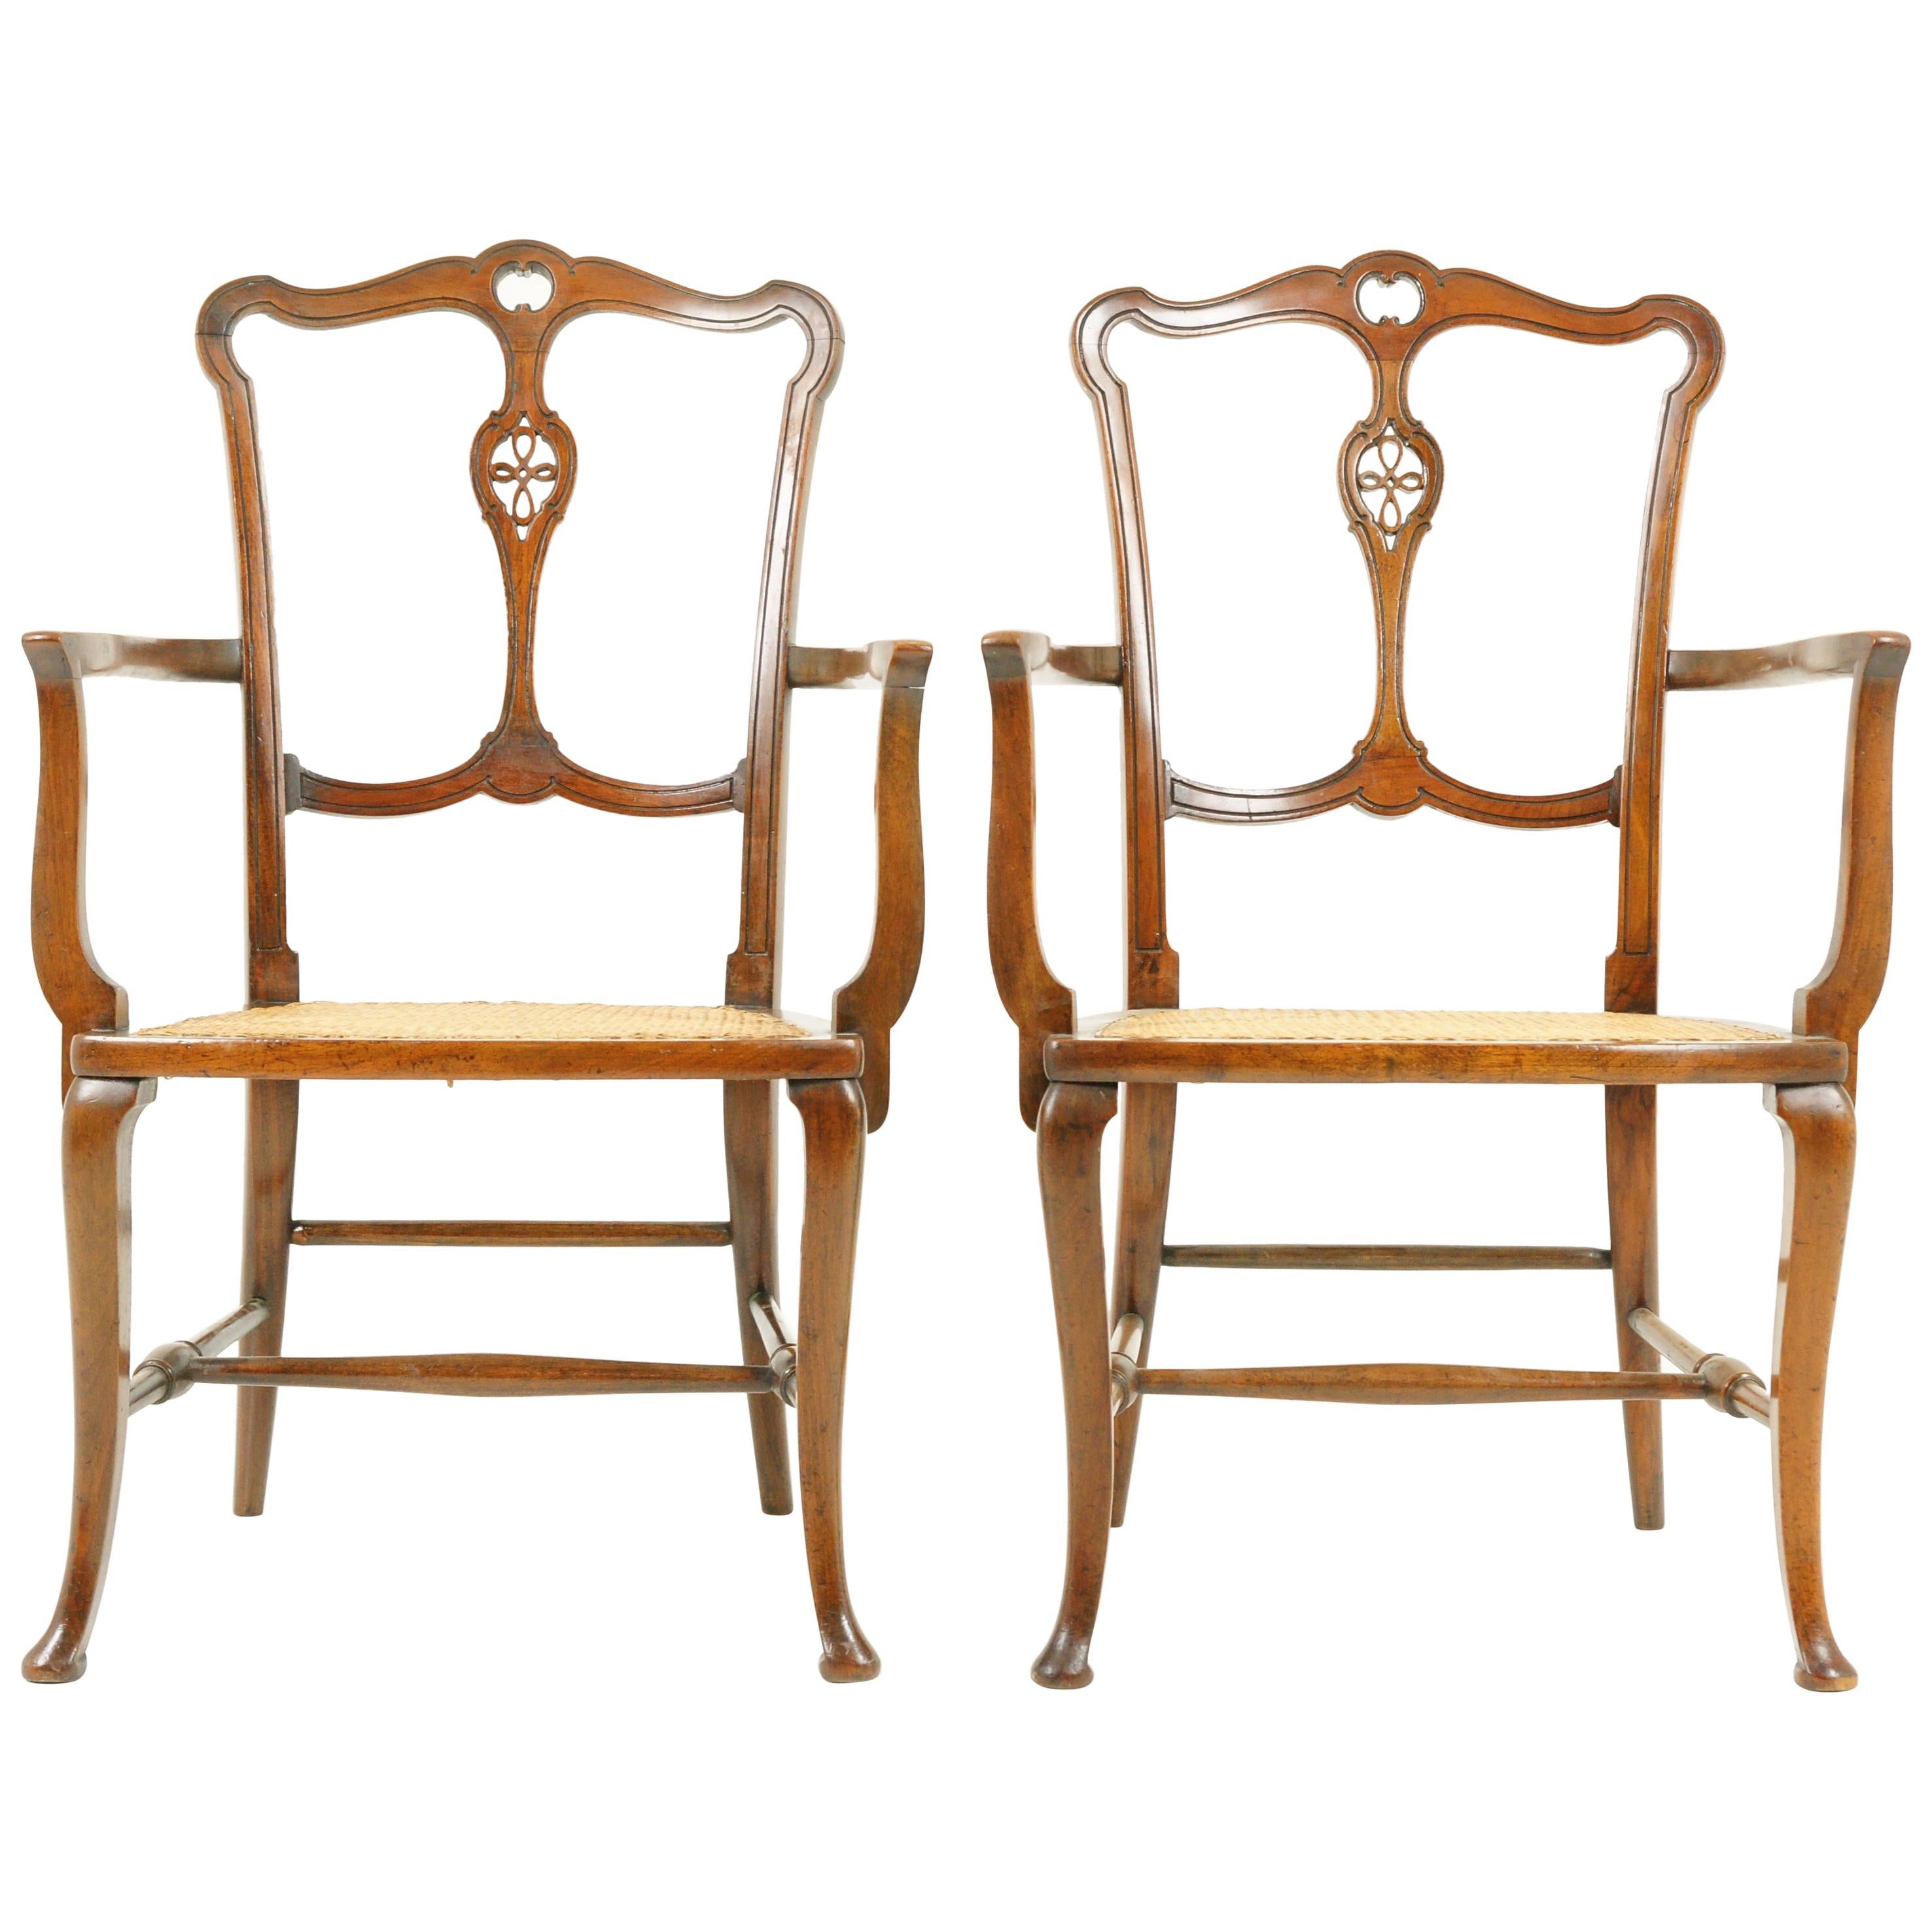 Antique Walnut Armchairs, Pair of Armchairs, Caned Seats, Scotland 1920, B1700